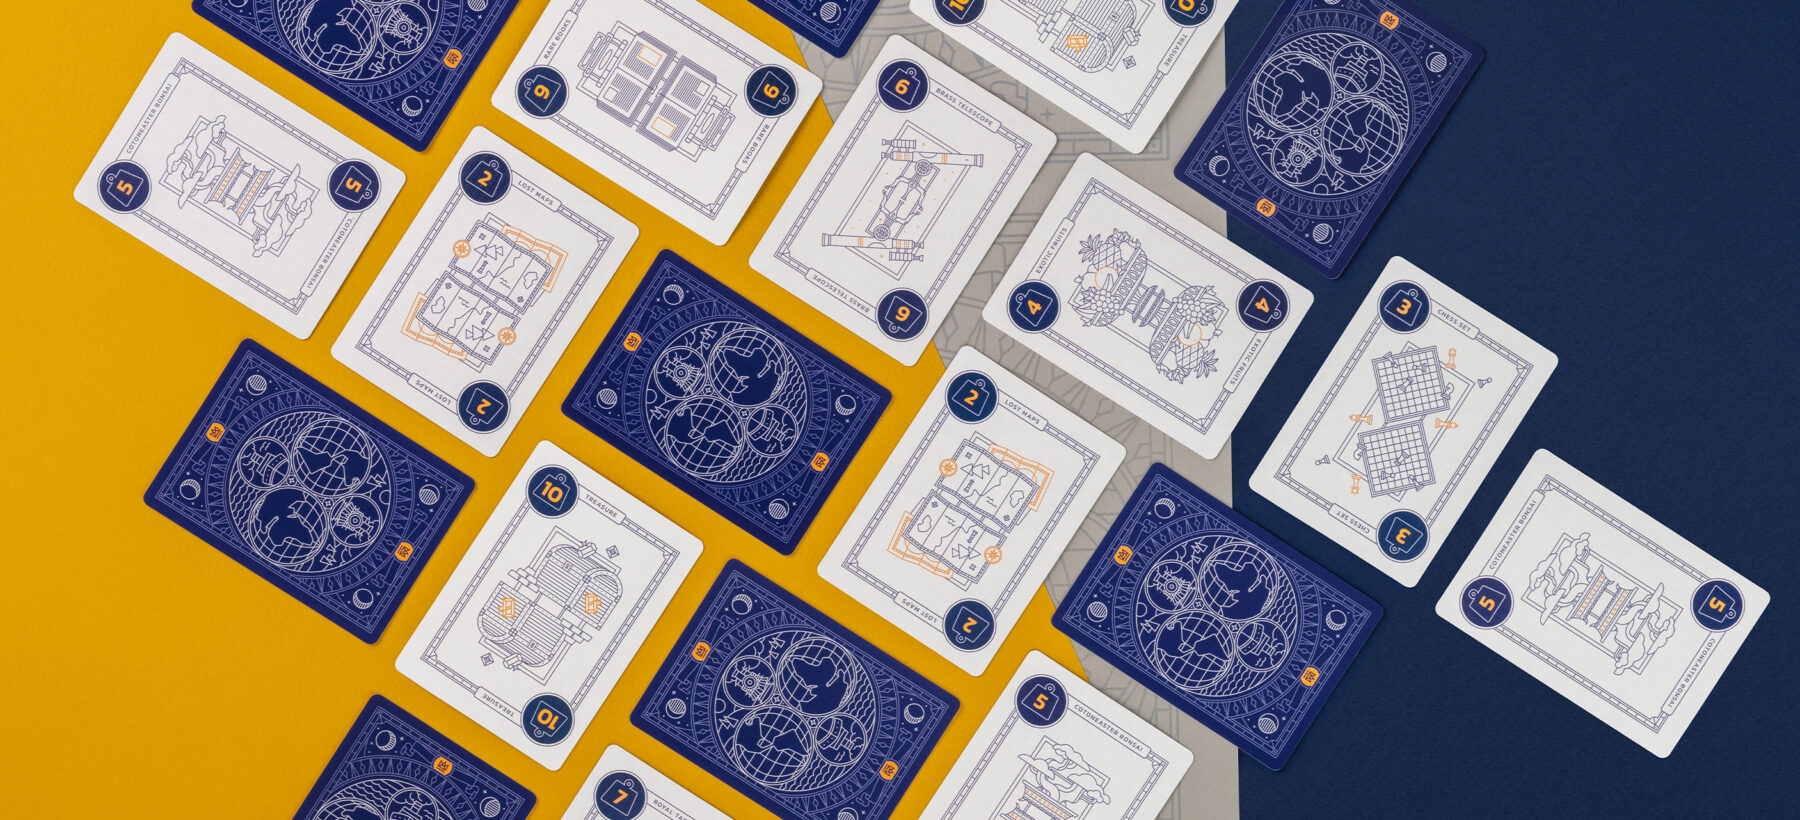 Front and backs of illustrated cards laid out in a grid on yellow and navy paper